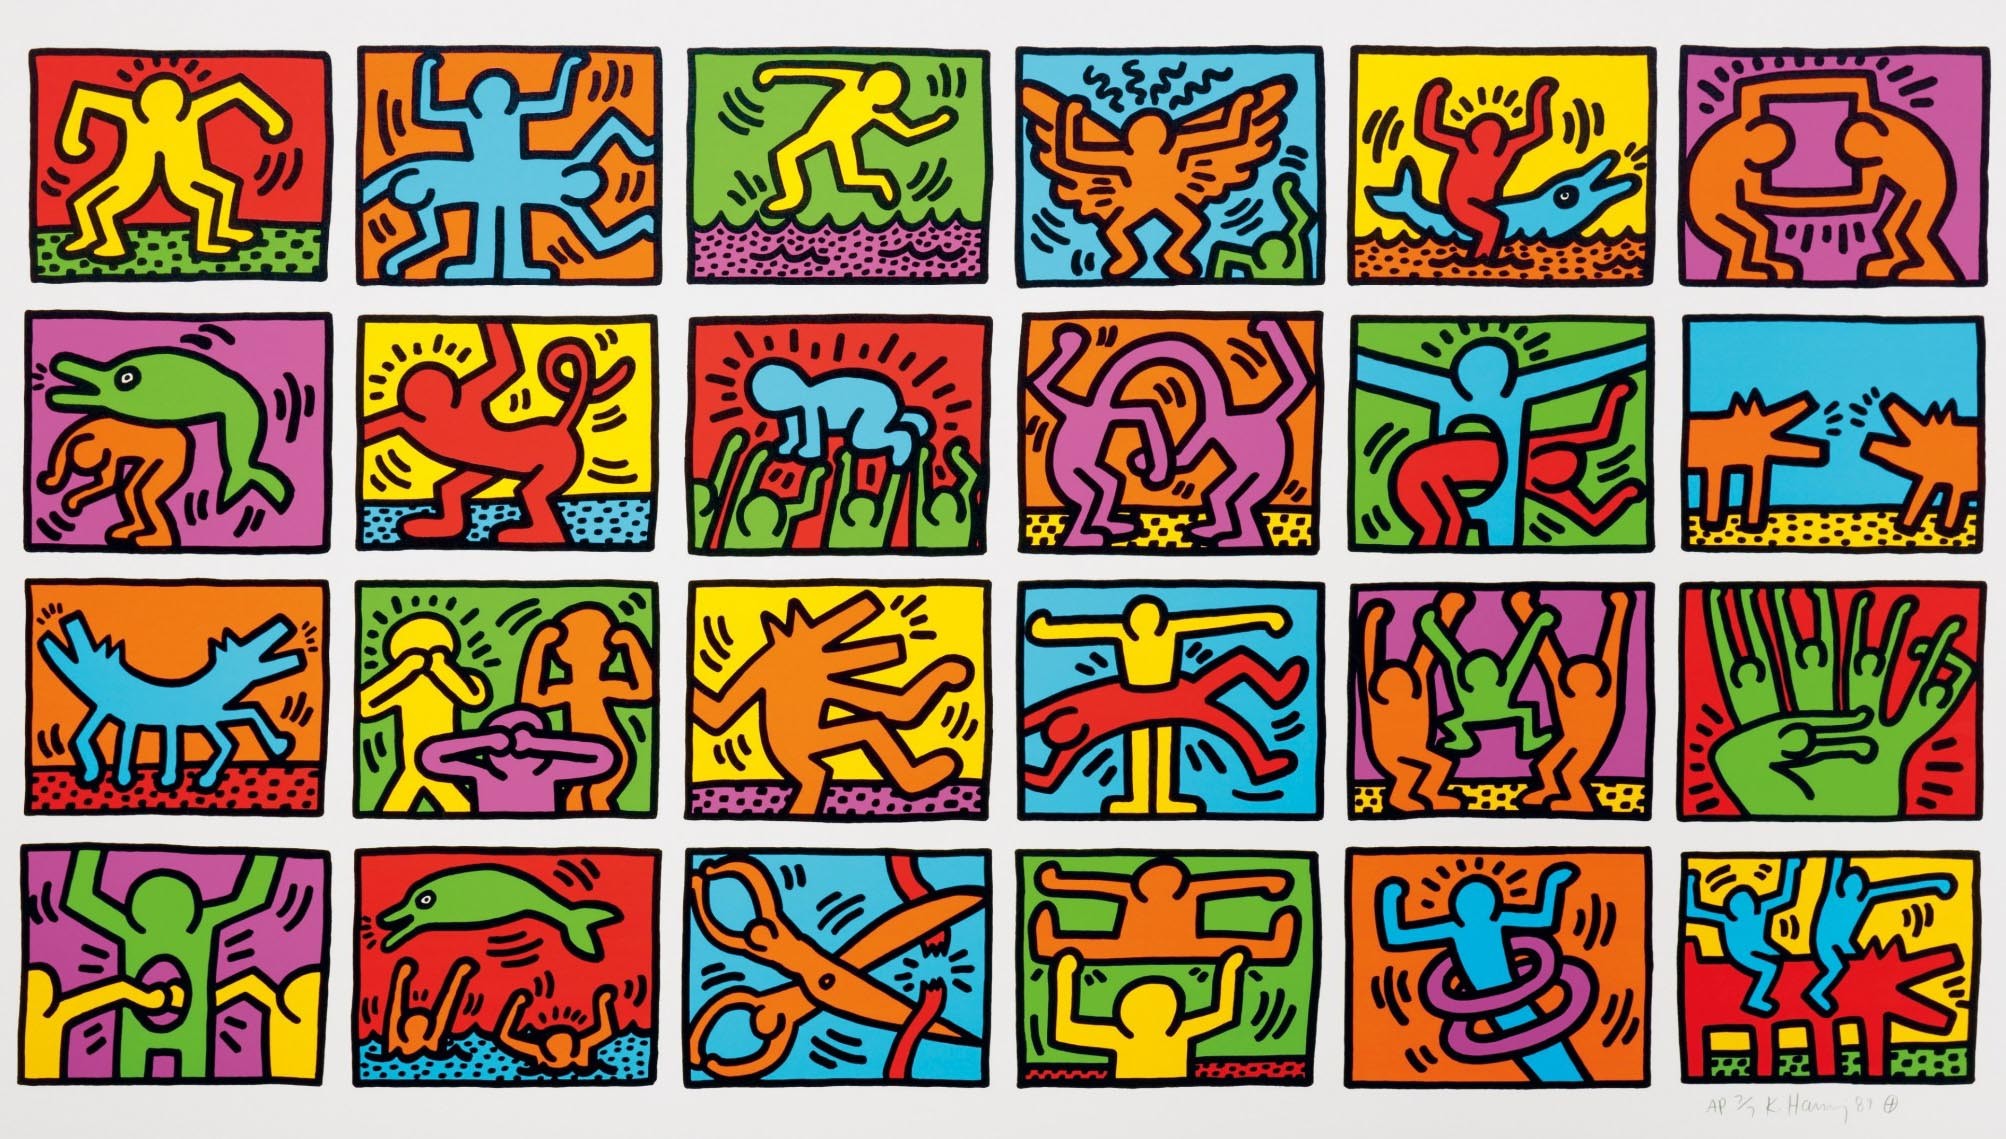 micheal stewart usa for africa keith haring